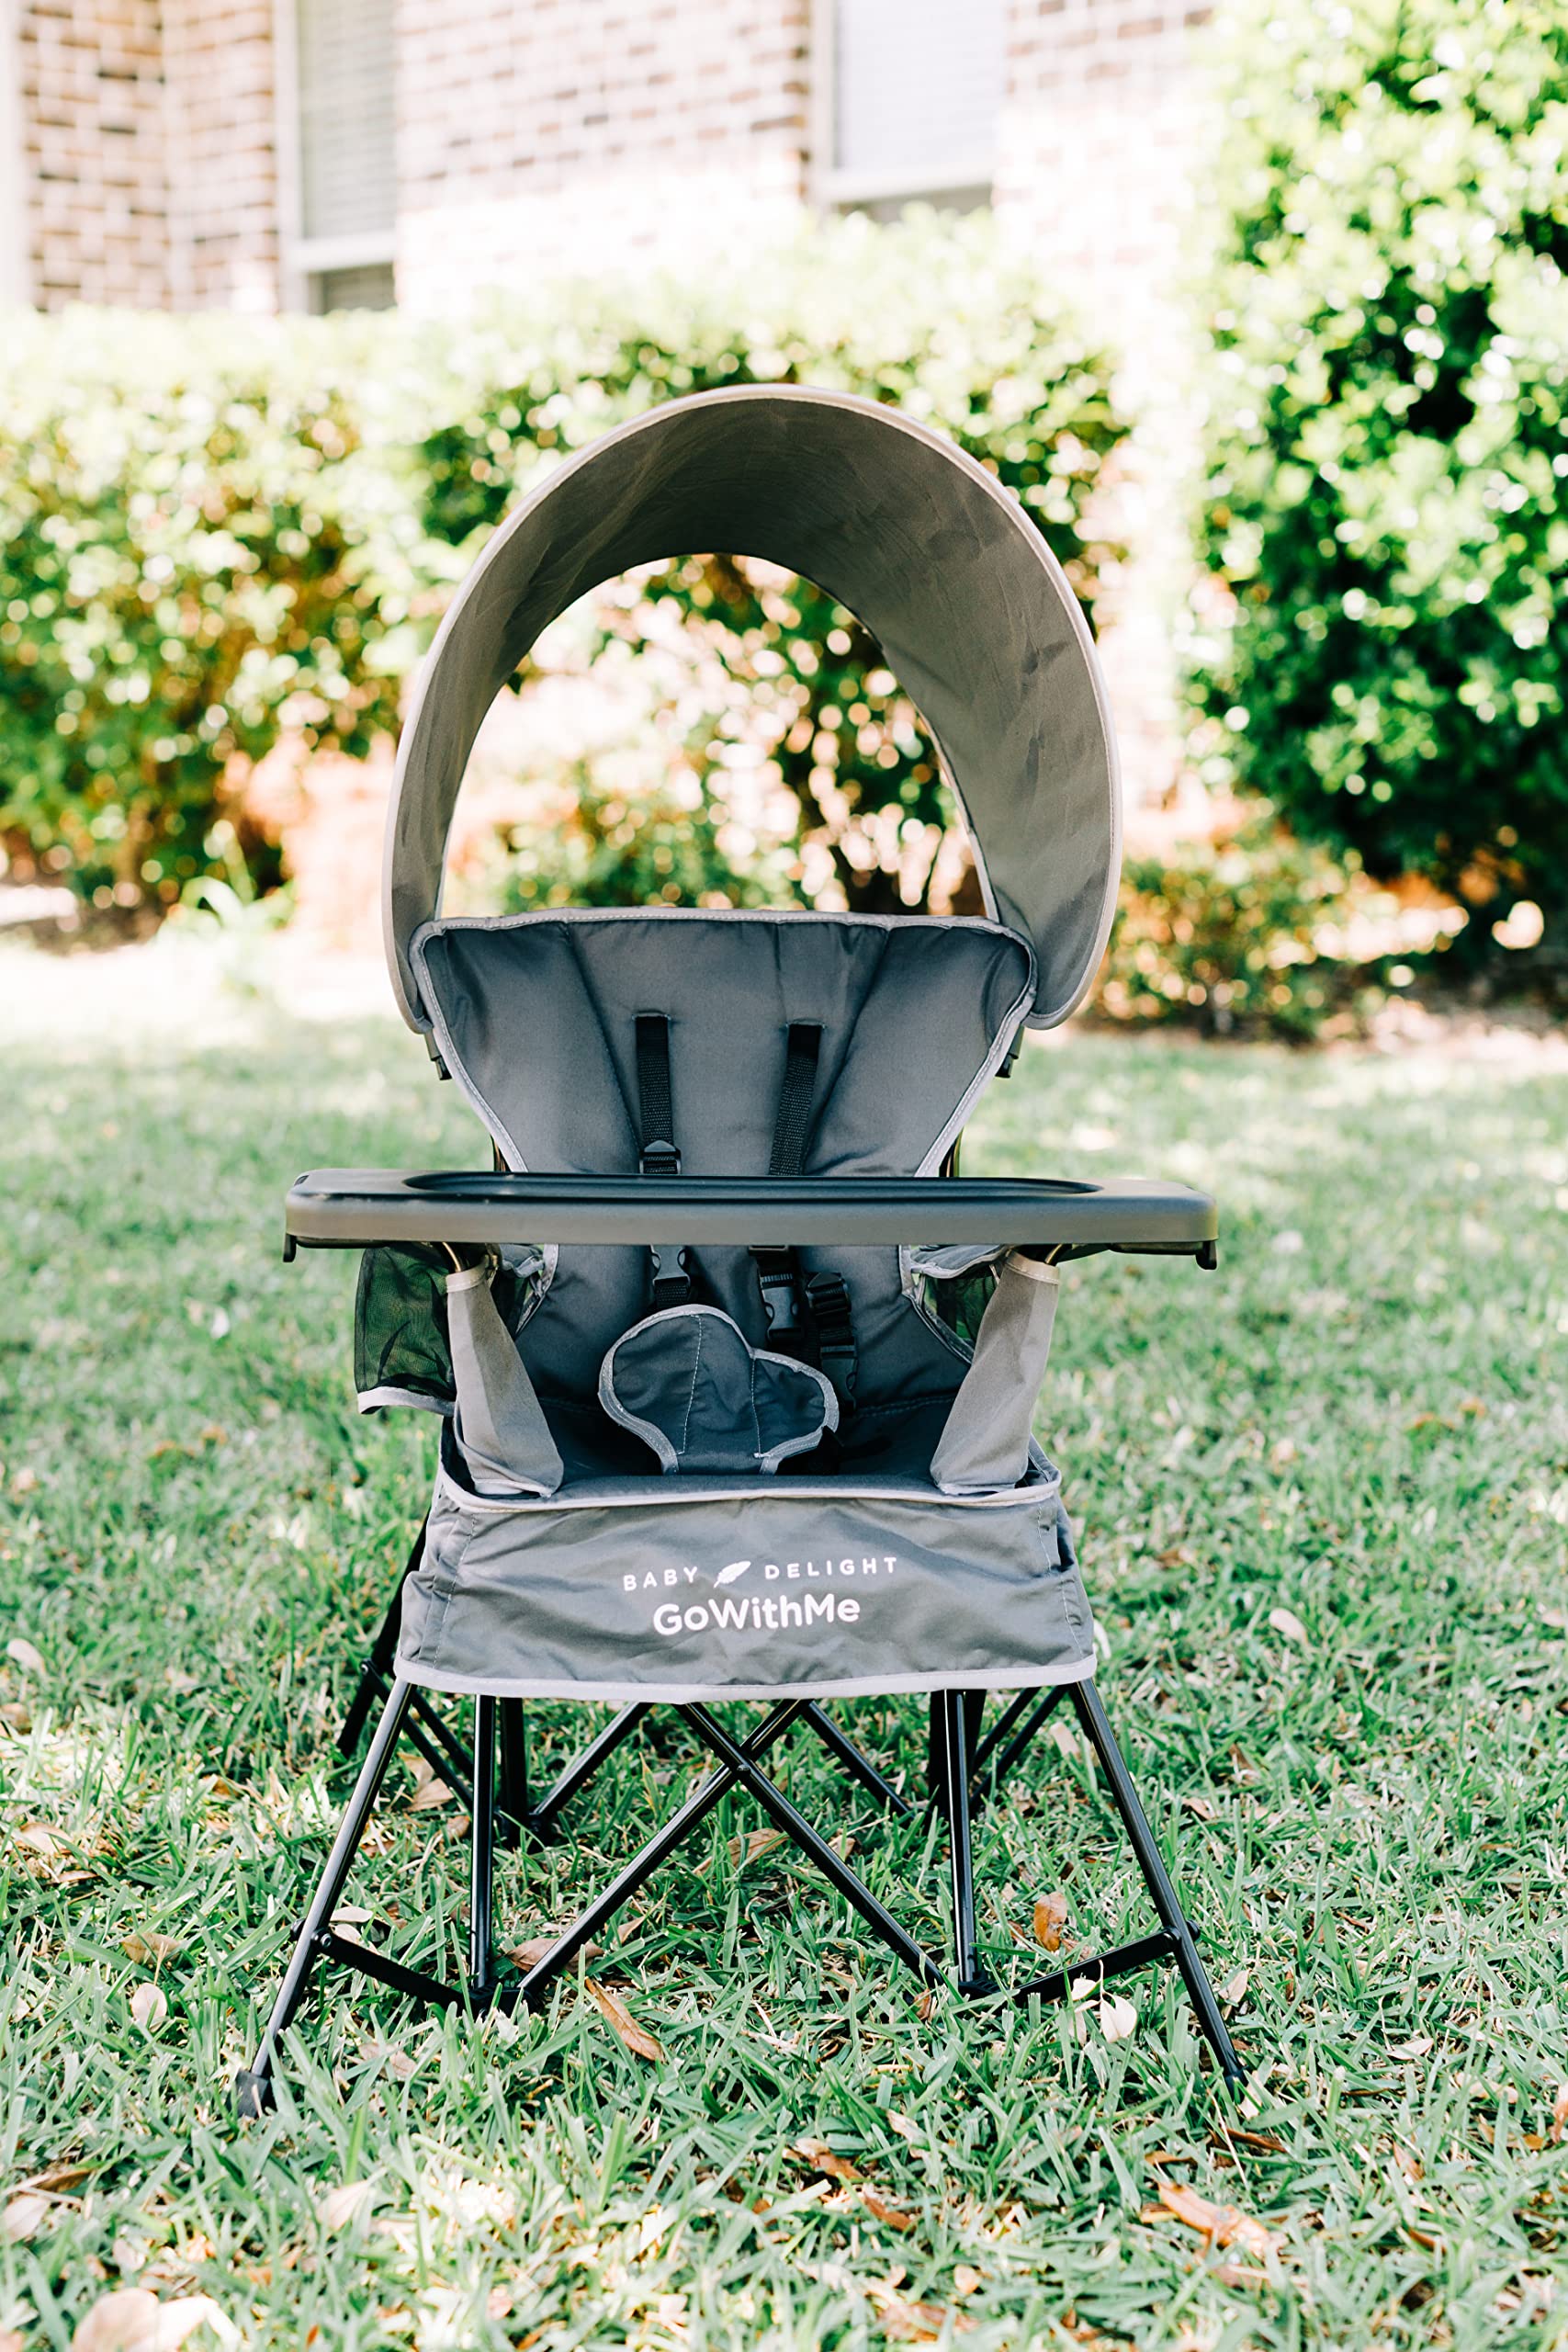 Baby Delight Go with Me Jubilee Deluxe Portable Chair | Indoor and Outdoor | Sun Canopy | Grey